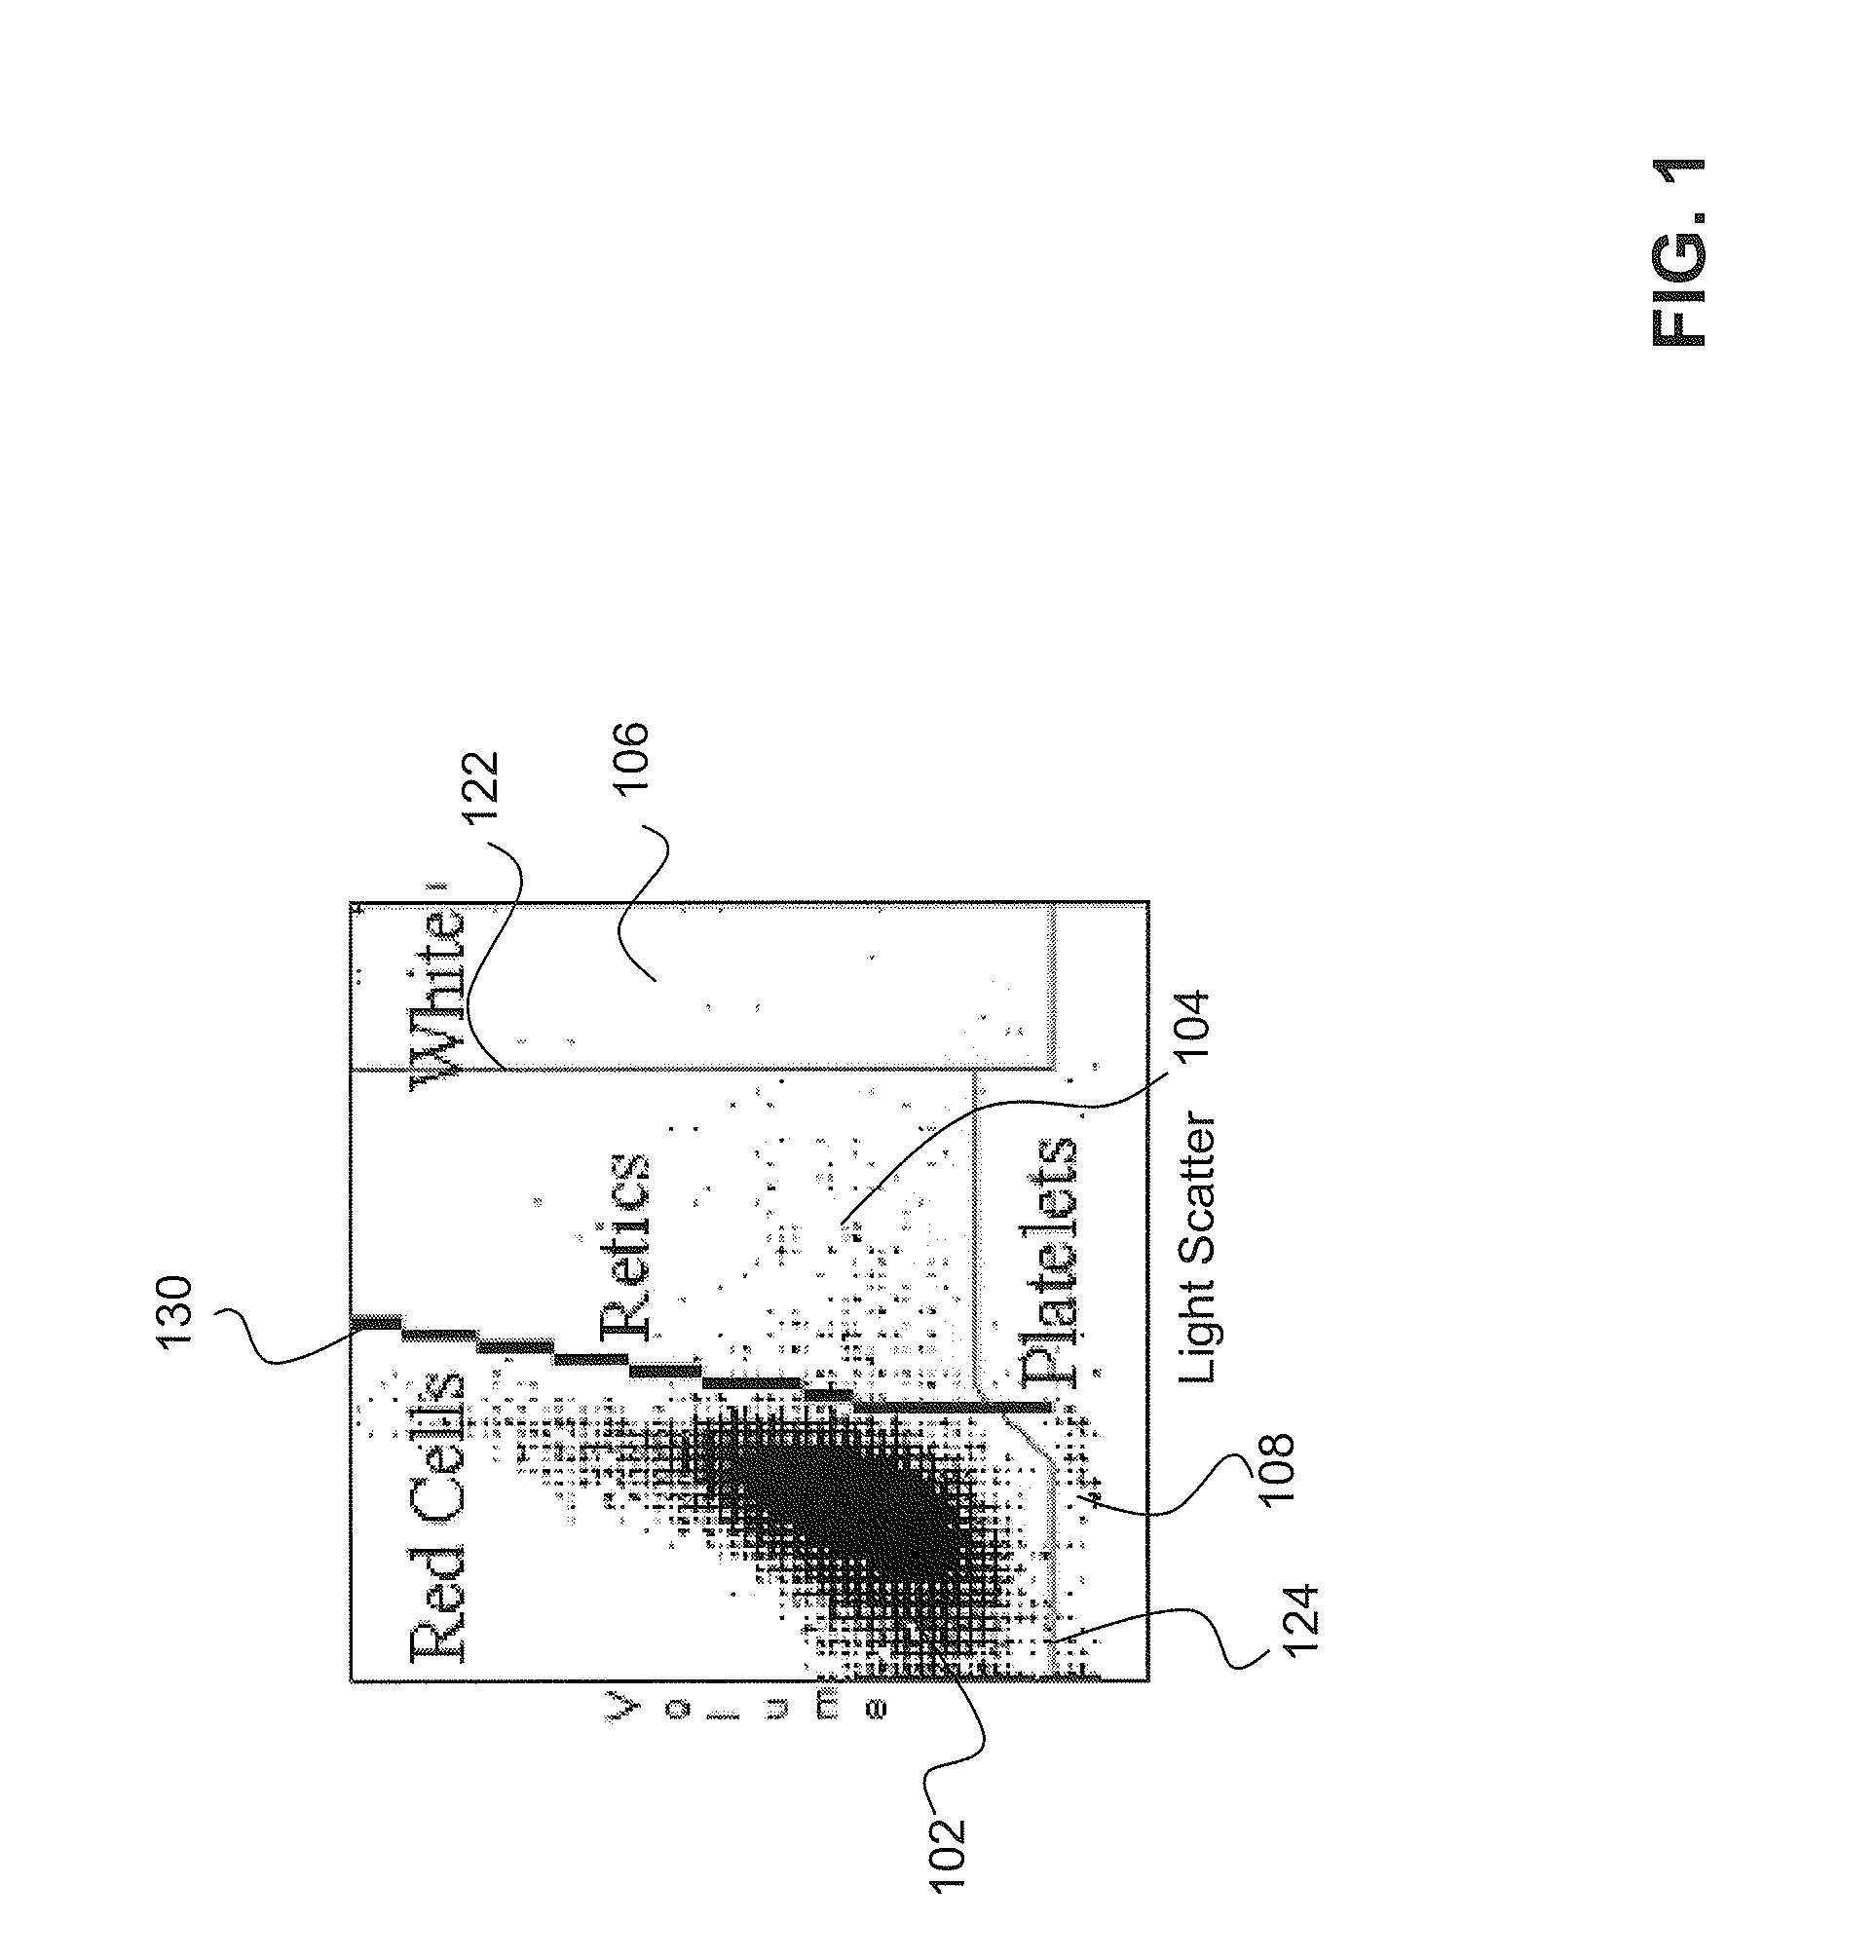 Method and System for Analyzing a Blood Sample